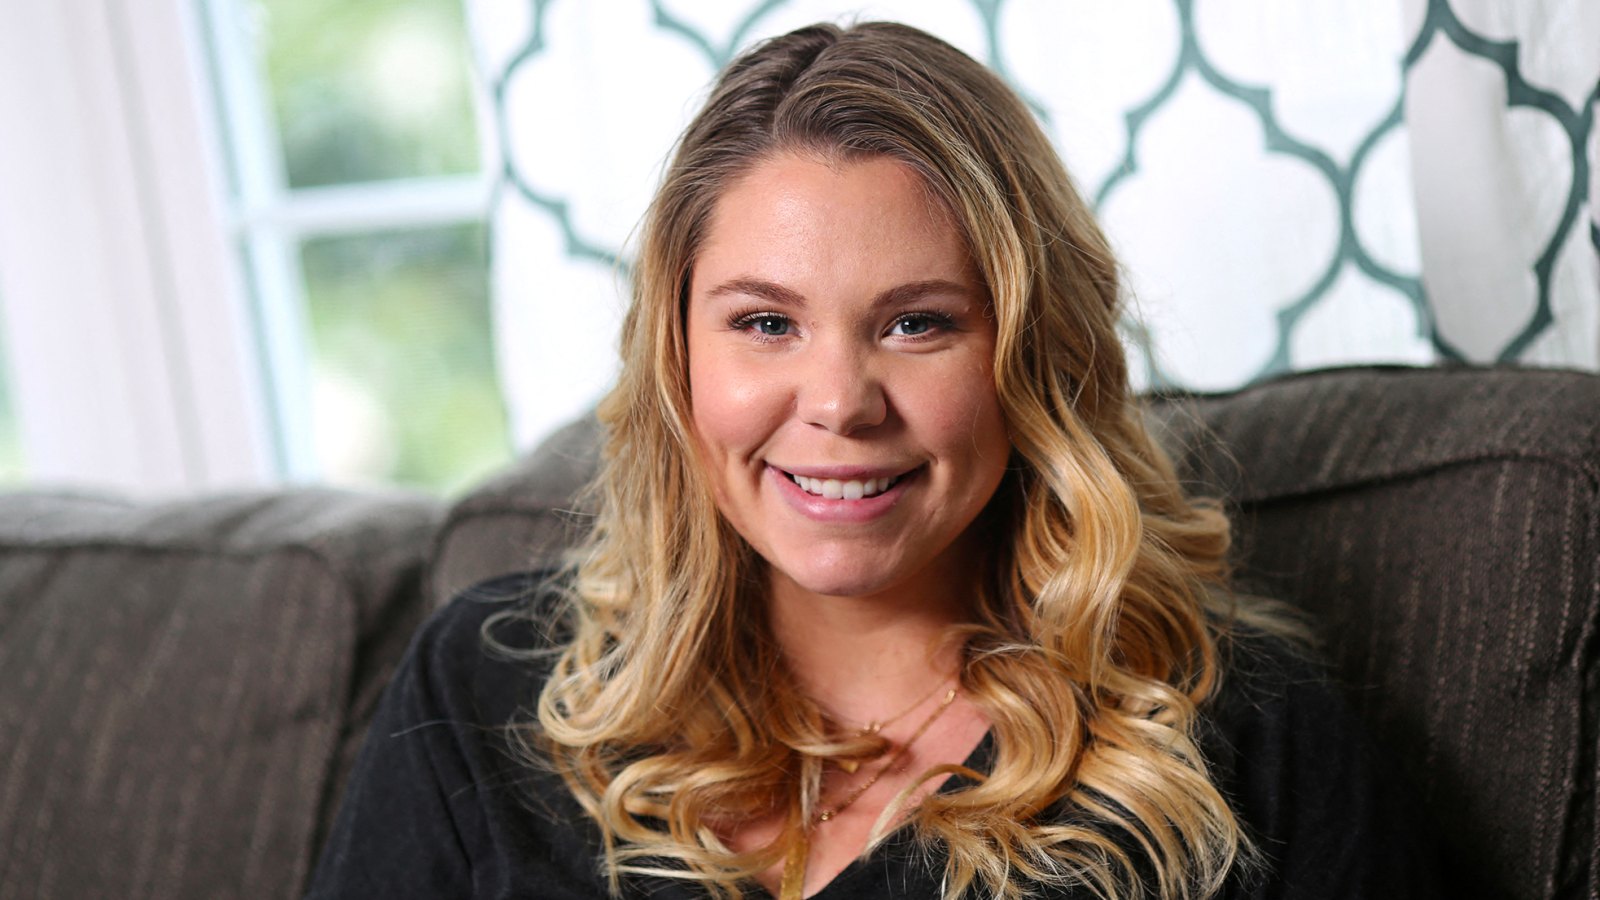 Teen Mom 2 Alum Kailyn Lowry Shares 1st Photos of Newborn Twins During Scary NICU Stay